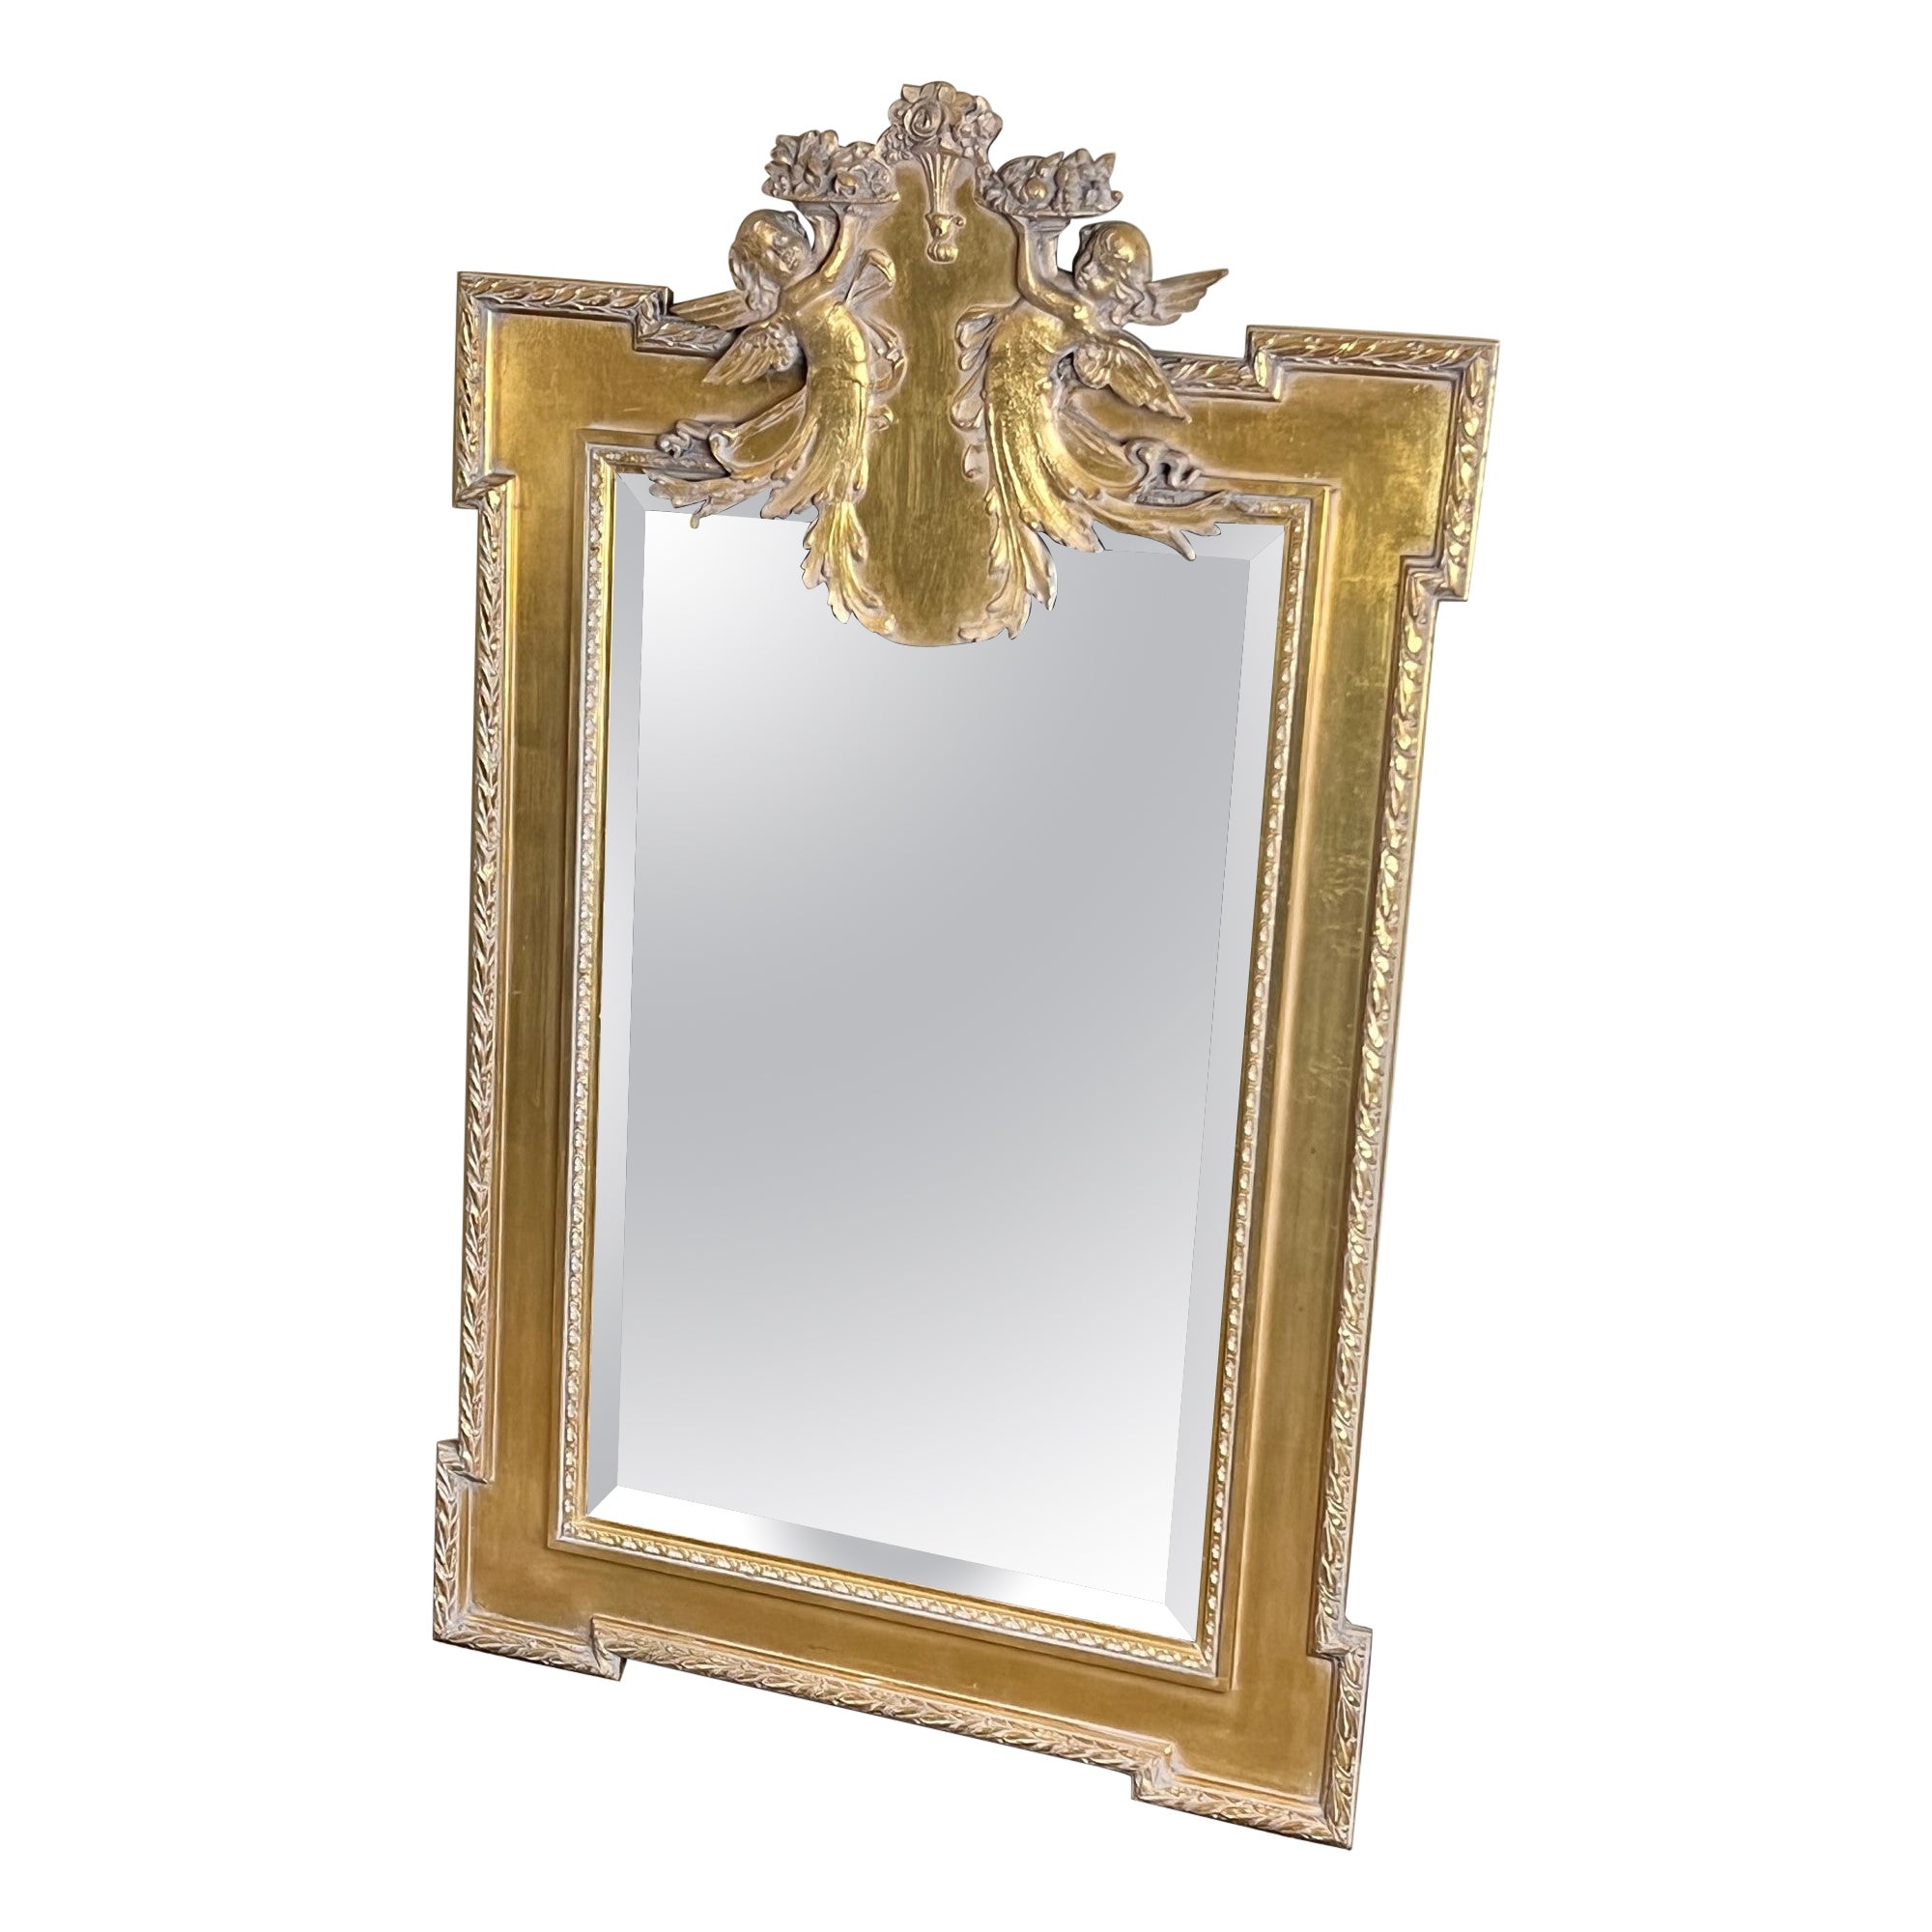 20th C. Neoclassical Style Giltwood Mirror with Cherub and Floral Decoration For Sale